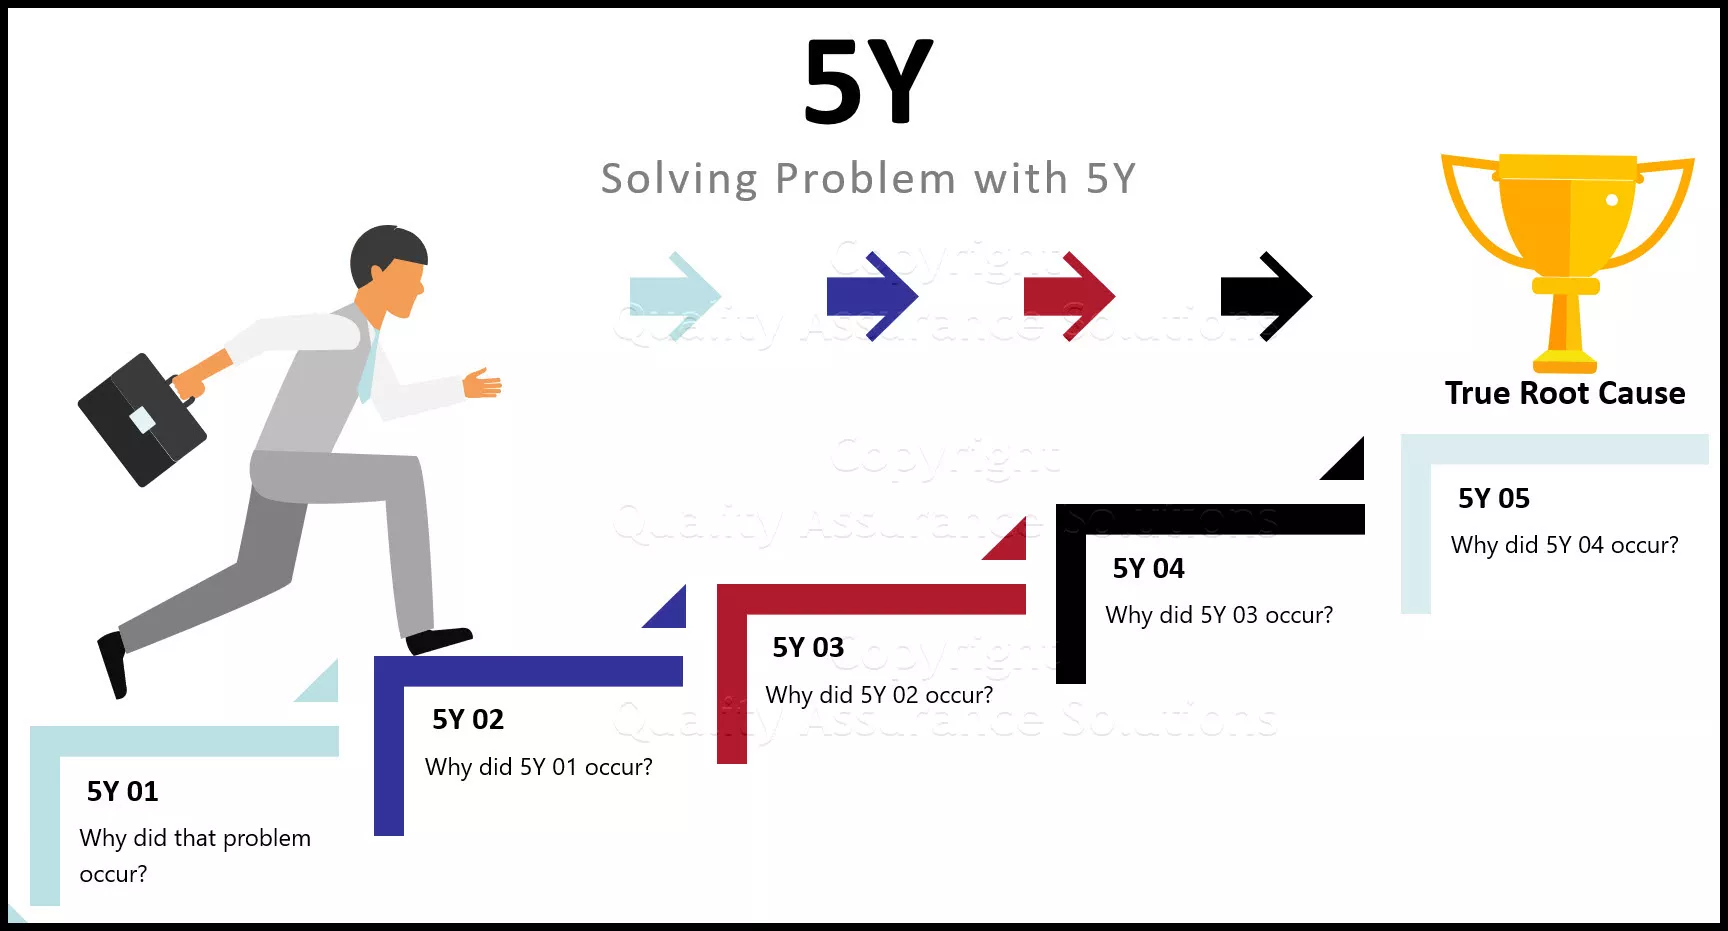 Learn 5 why problem solving and how this connects to 8D problem solving. See how to use 5Y analysis for customer corrective actions.